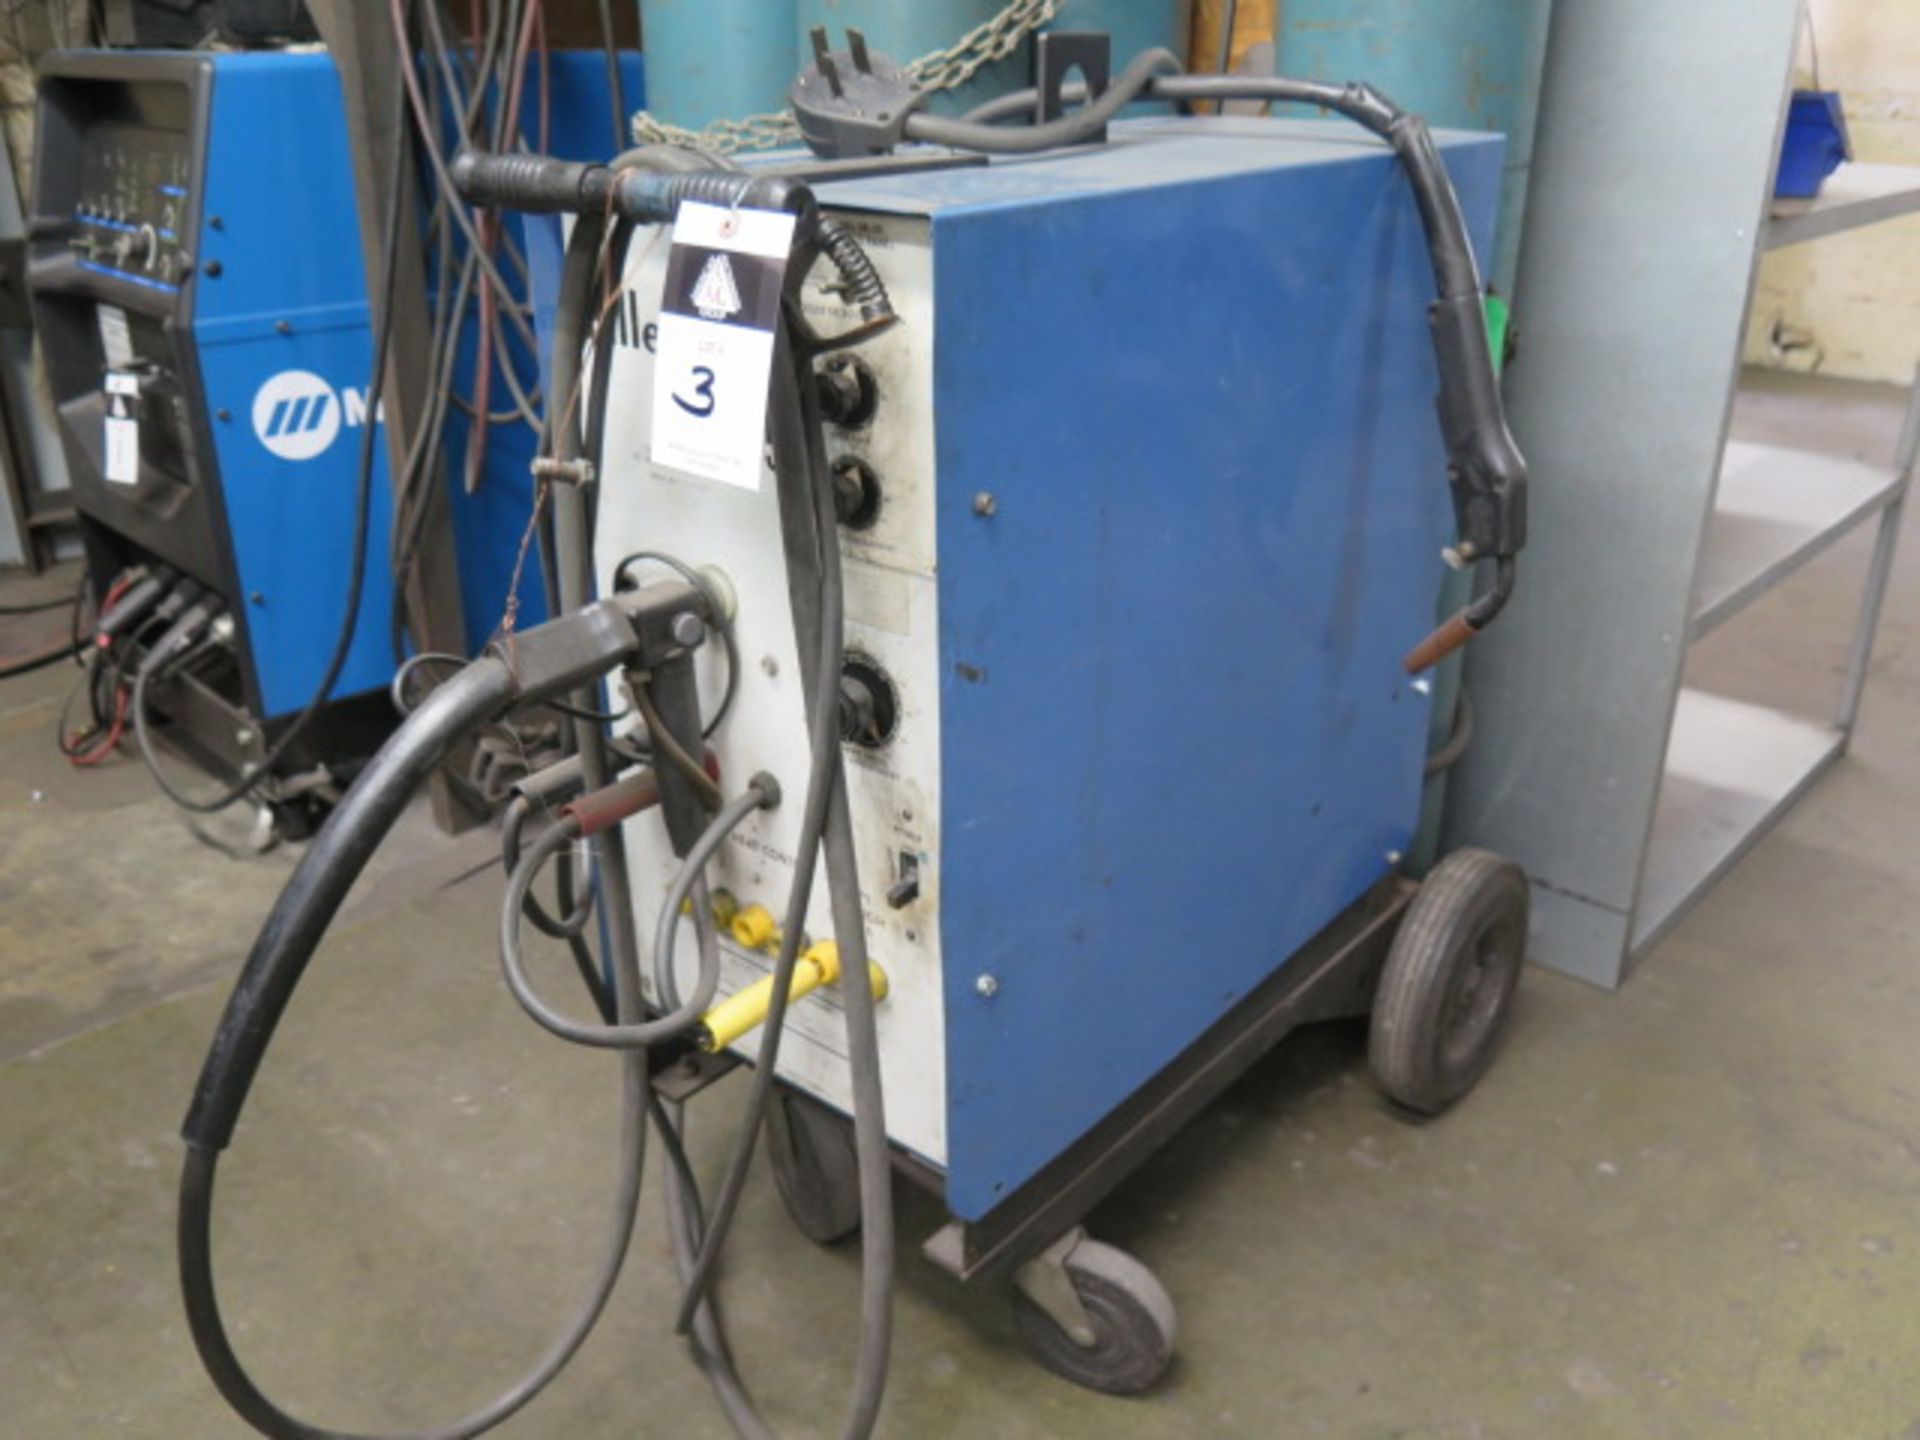 Miller illermatic 35 CP-DC Arc Welding Power Source (NO TANK) (SOLD AS-IS - NO WARRANTY) - Image 2 of 6